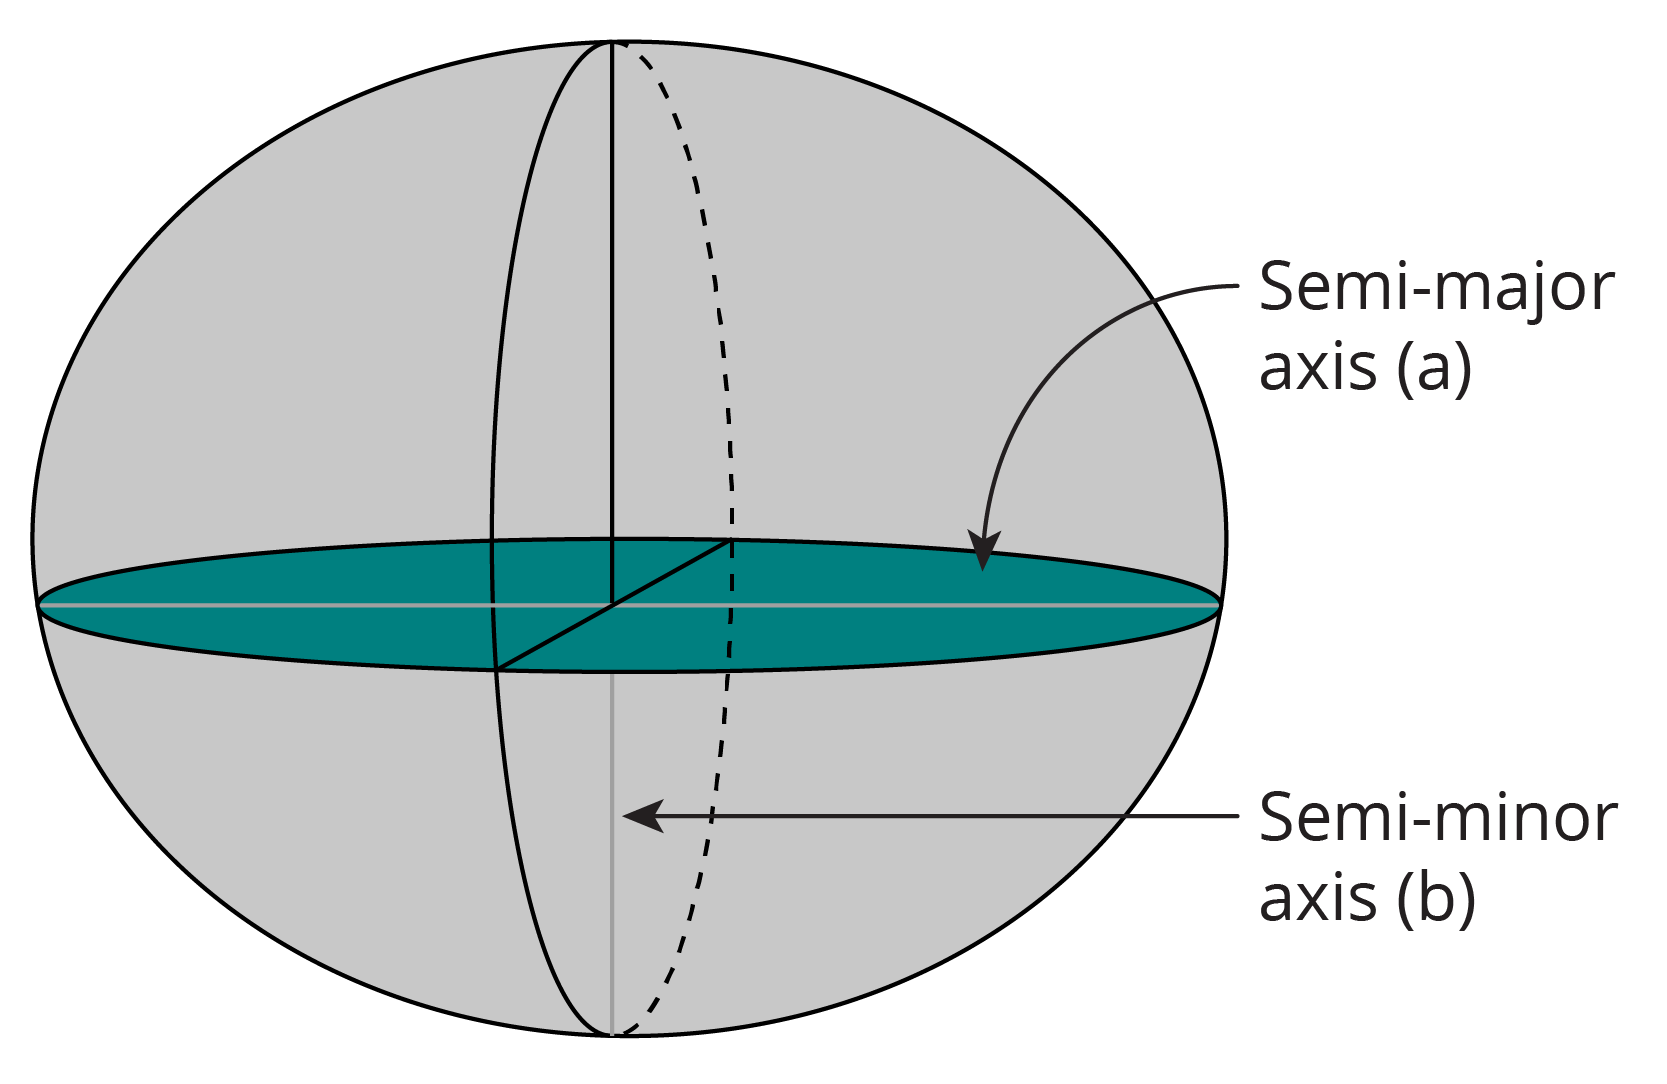 A Reference ellipsoid